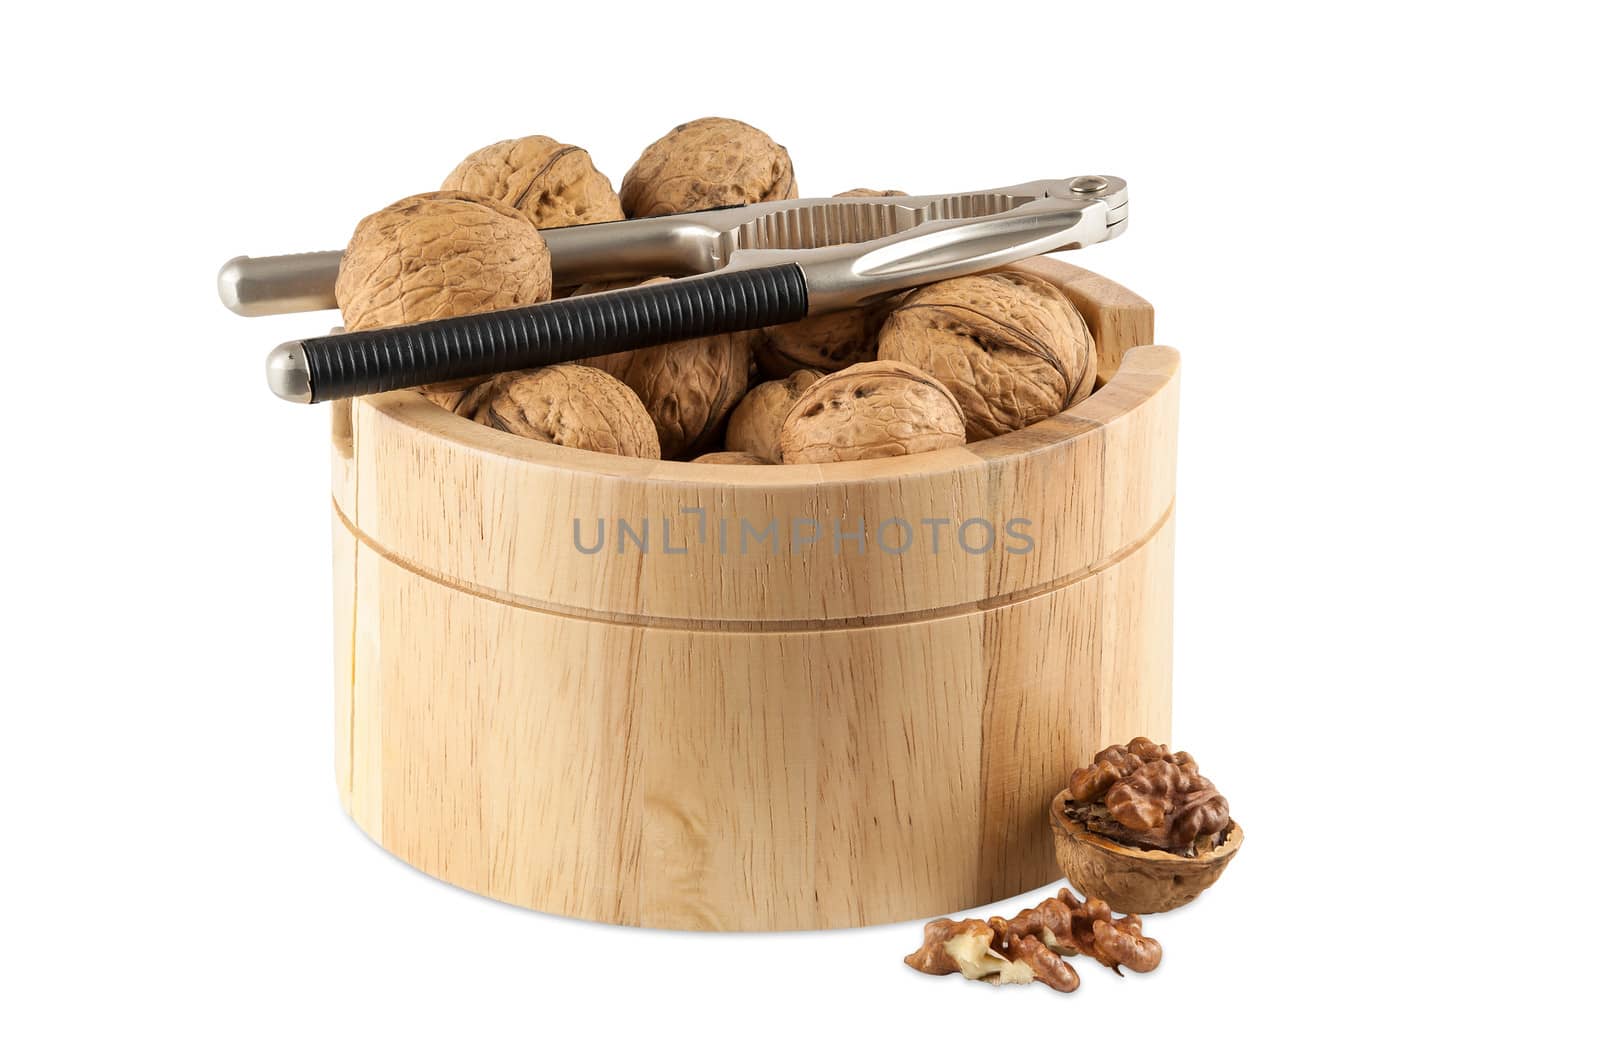 Walnuts in utensil with nutcracker isolated on white background with clipping path